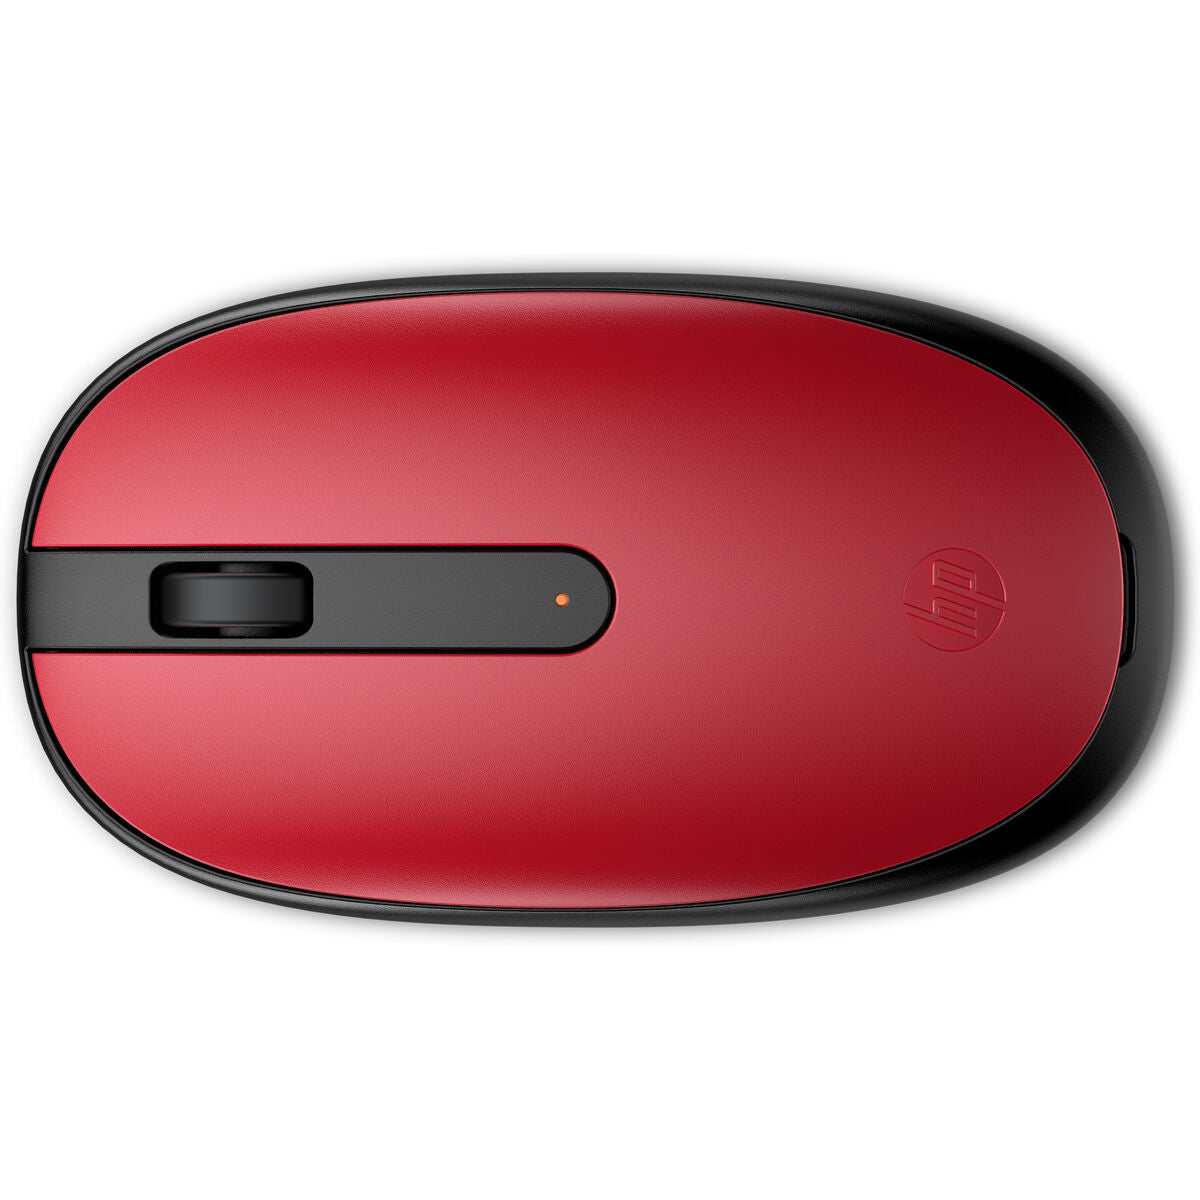 Optical Wireless Mouse HP 240 Red, HP, Computing, Accessories, optical-wireless-mouse-hp-240-red, Brand_HP, category-reference-2609, category-reference-2642, category-reference-2656, category-reference-t-19685, category-reference-t-19908, category-reference-t-21353, category-reference-t-25626, computers / peripherals, Condition_NEW, office, Price_20 - 50, Teleworking, RiotNook